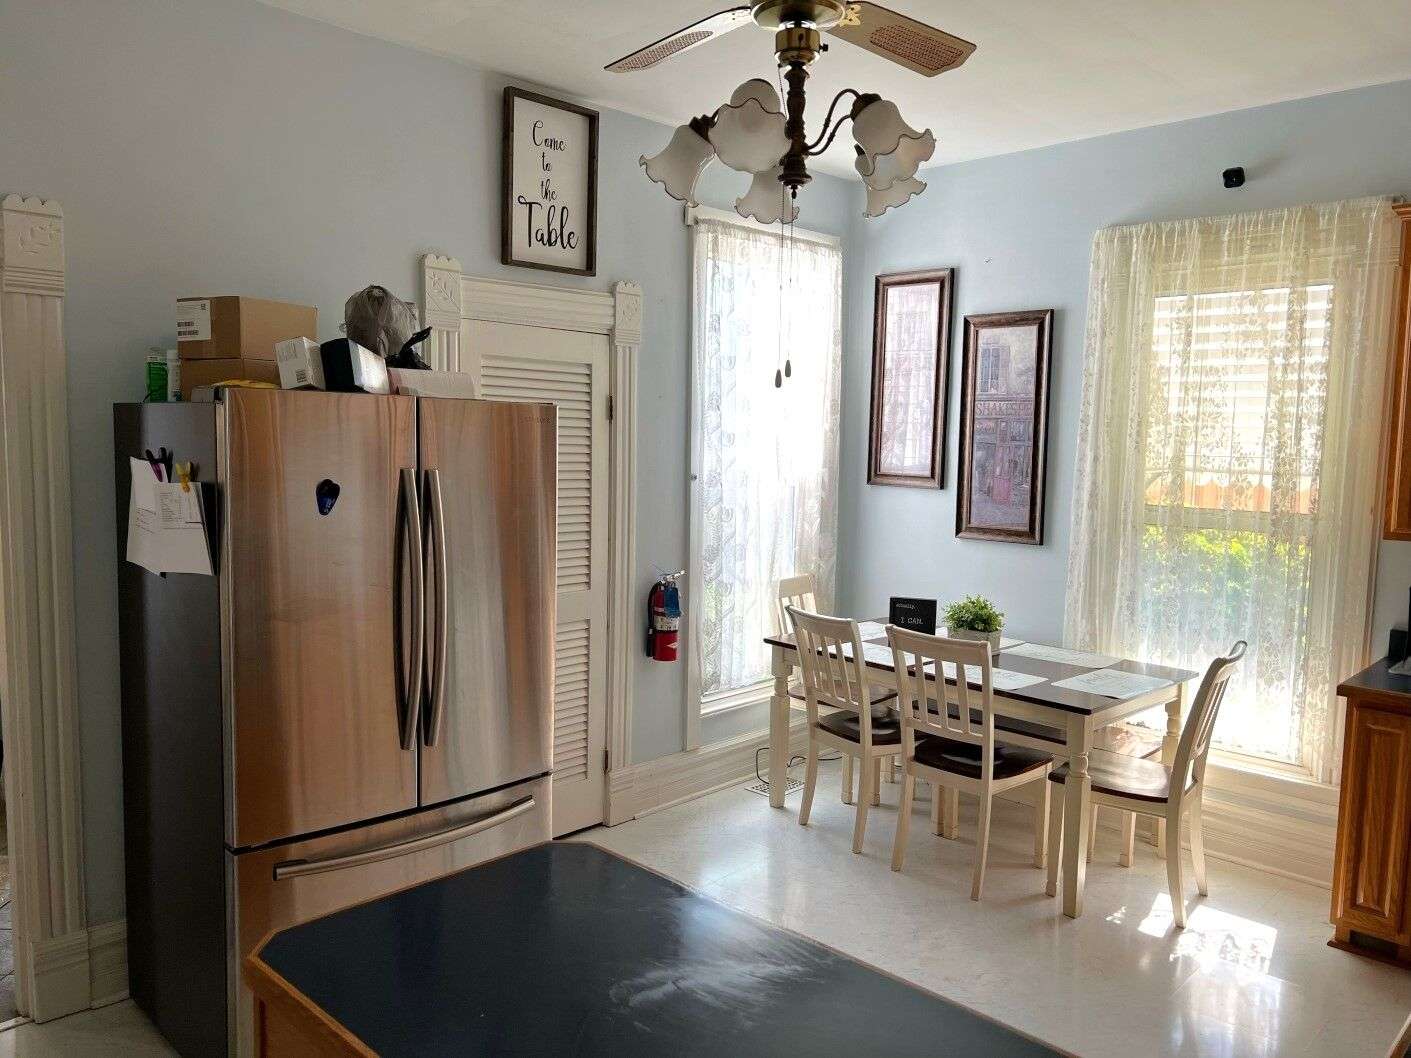 a cozy and clean residential kitchen and dining area welcomes temporary residents of Haven Home